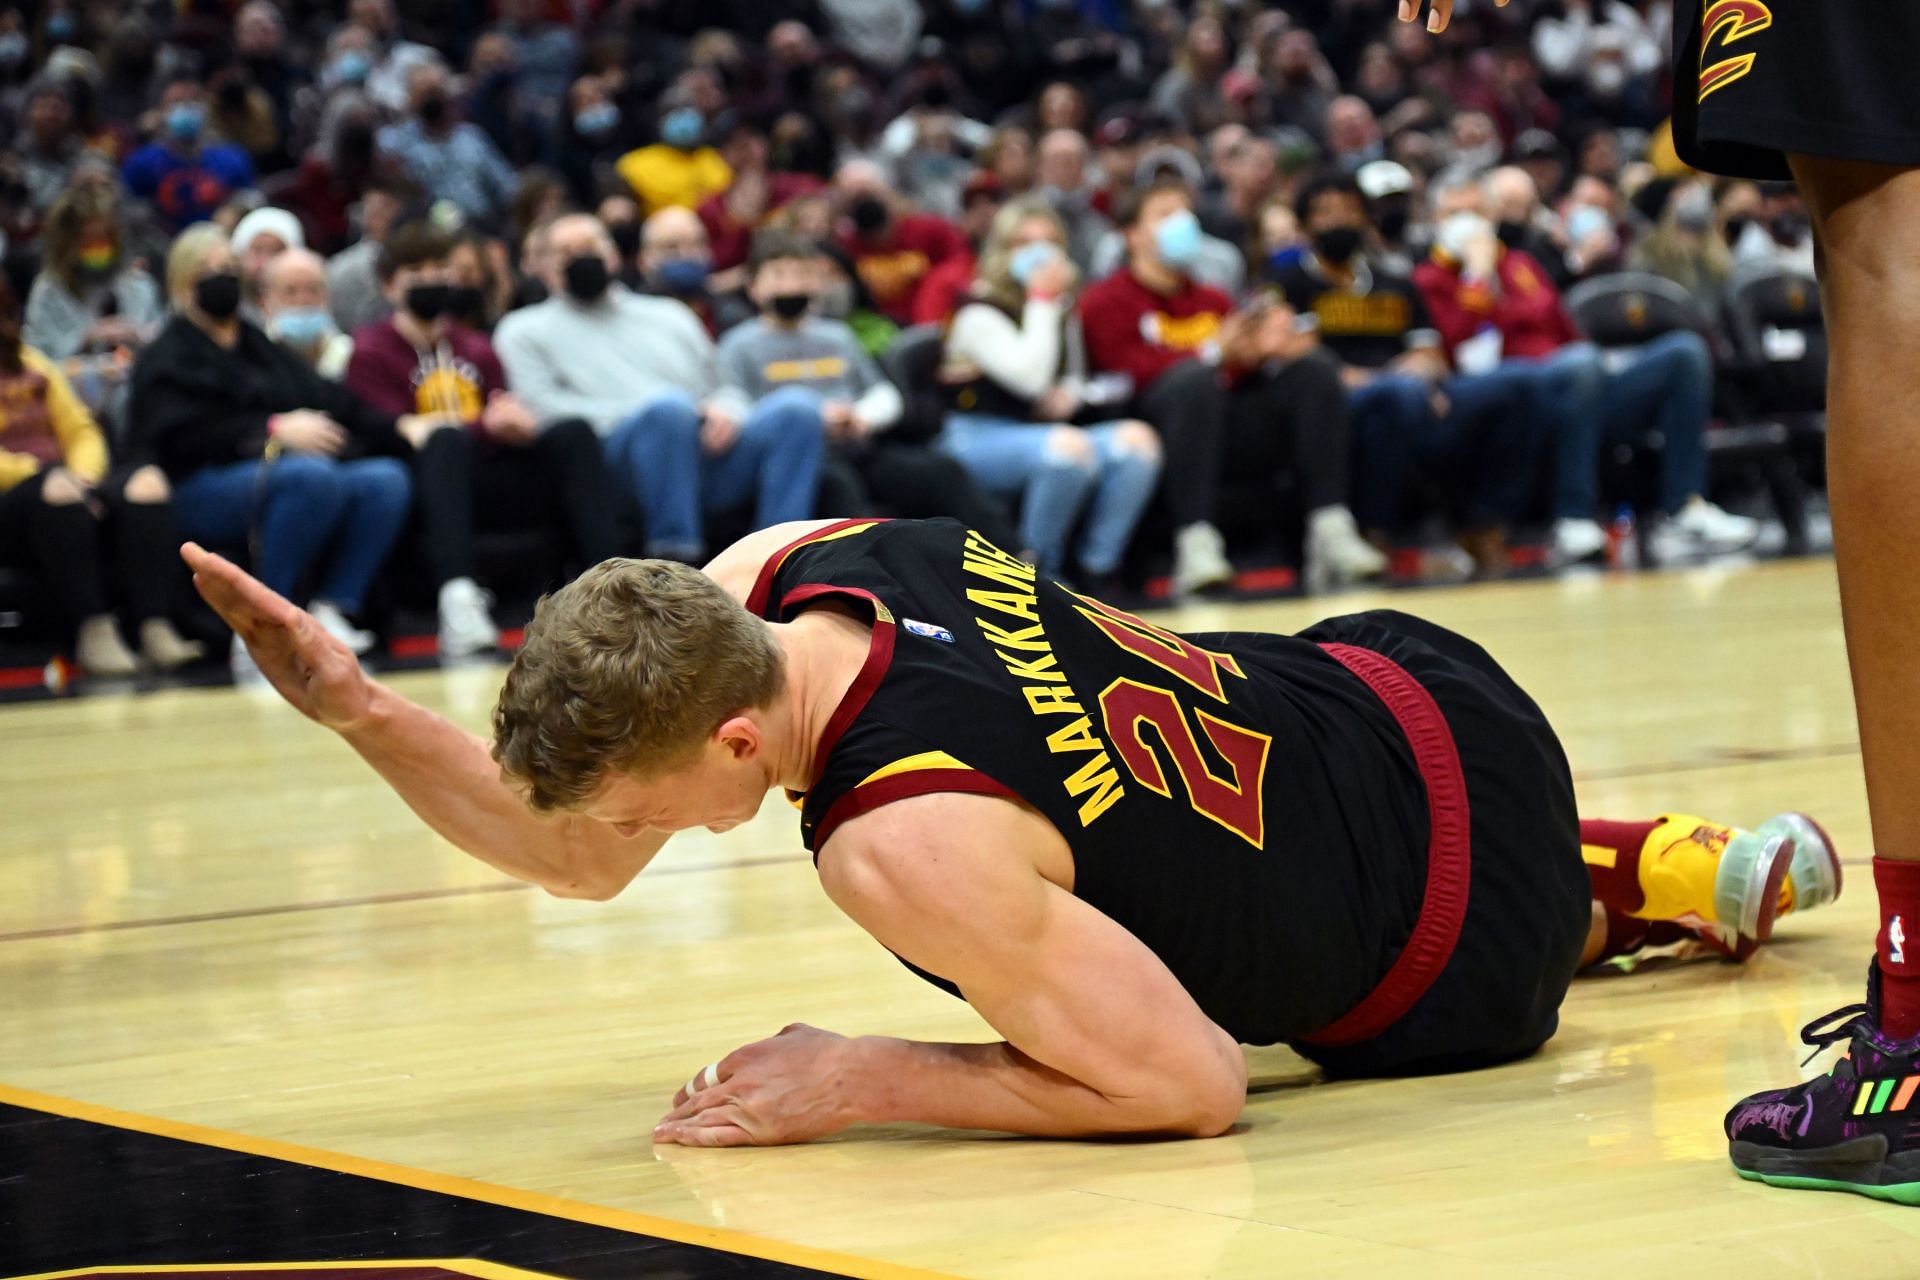 Lauri Markkanen goes to the floor with an ankle injury